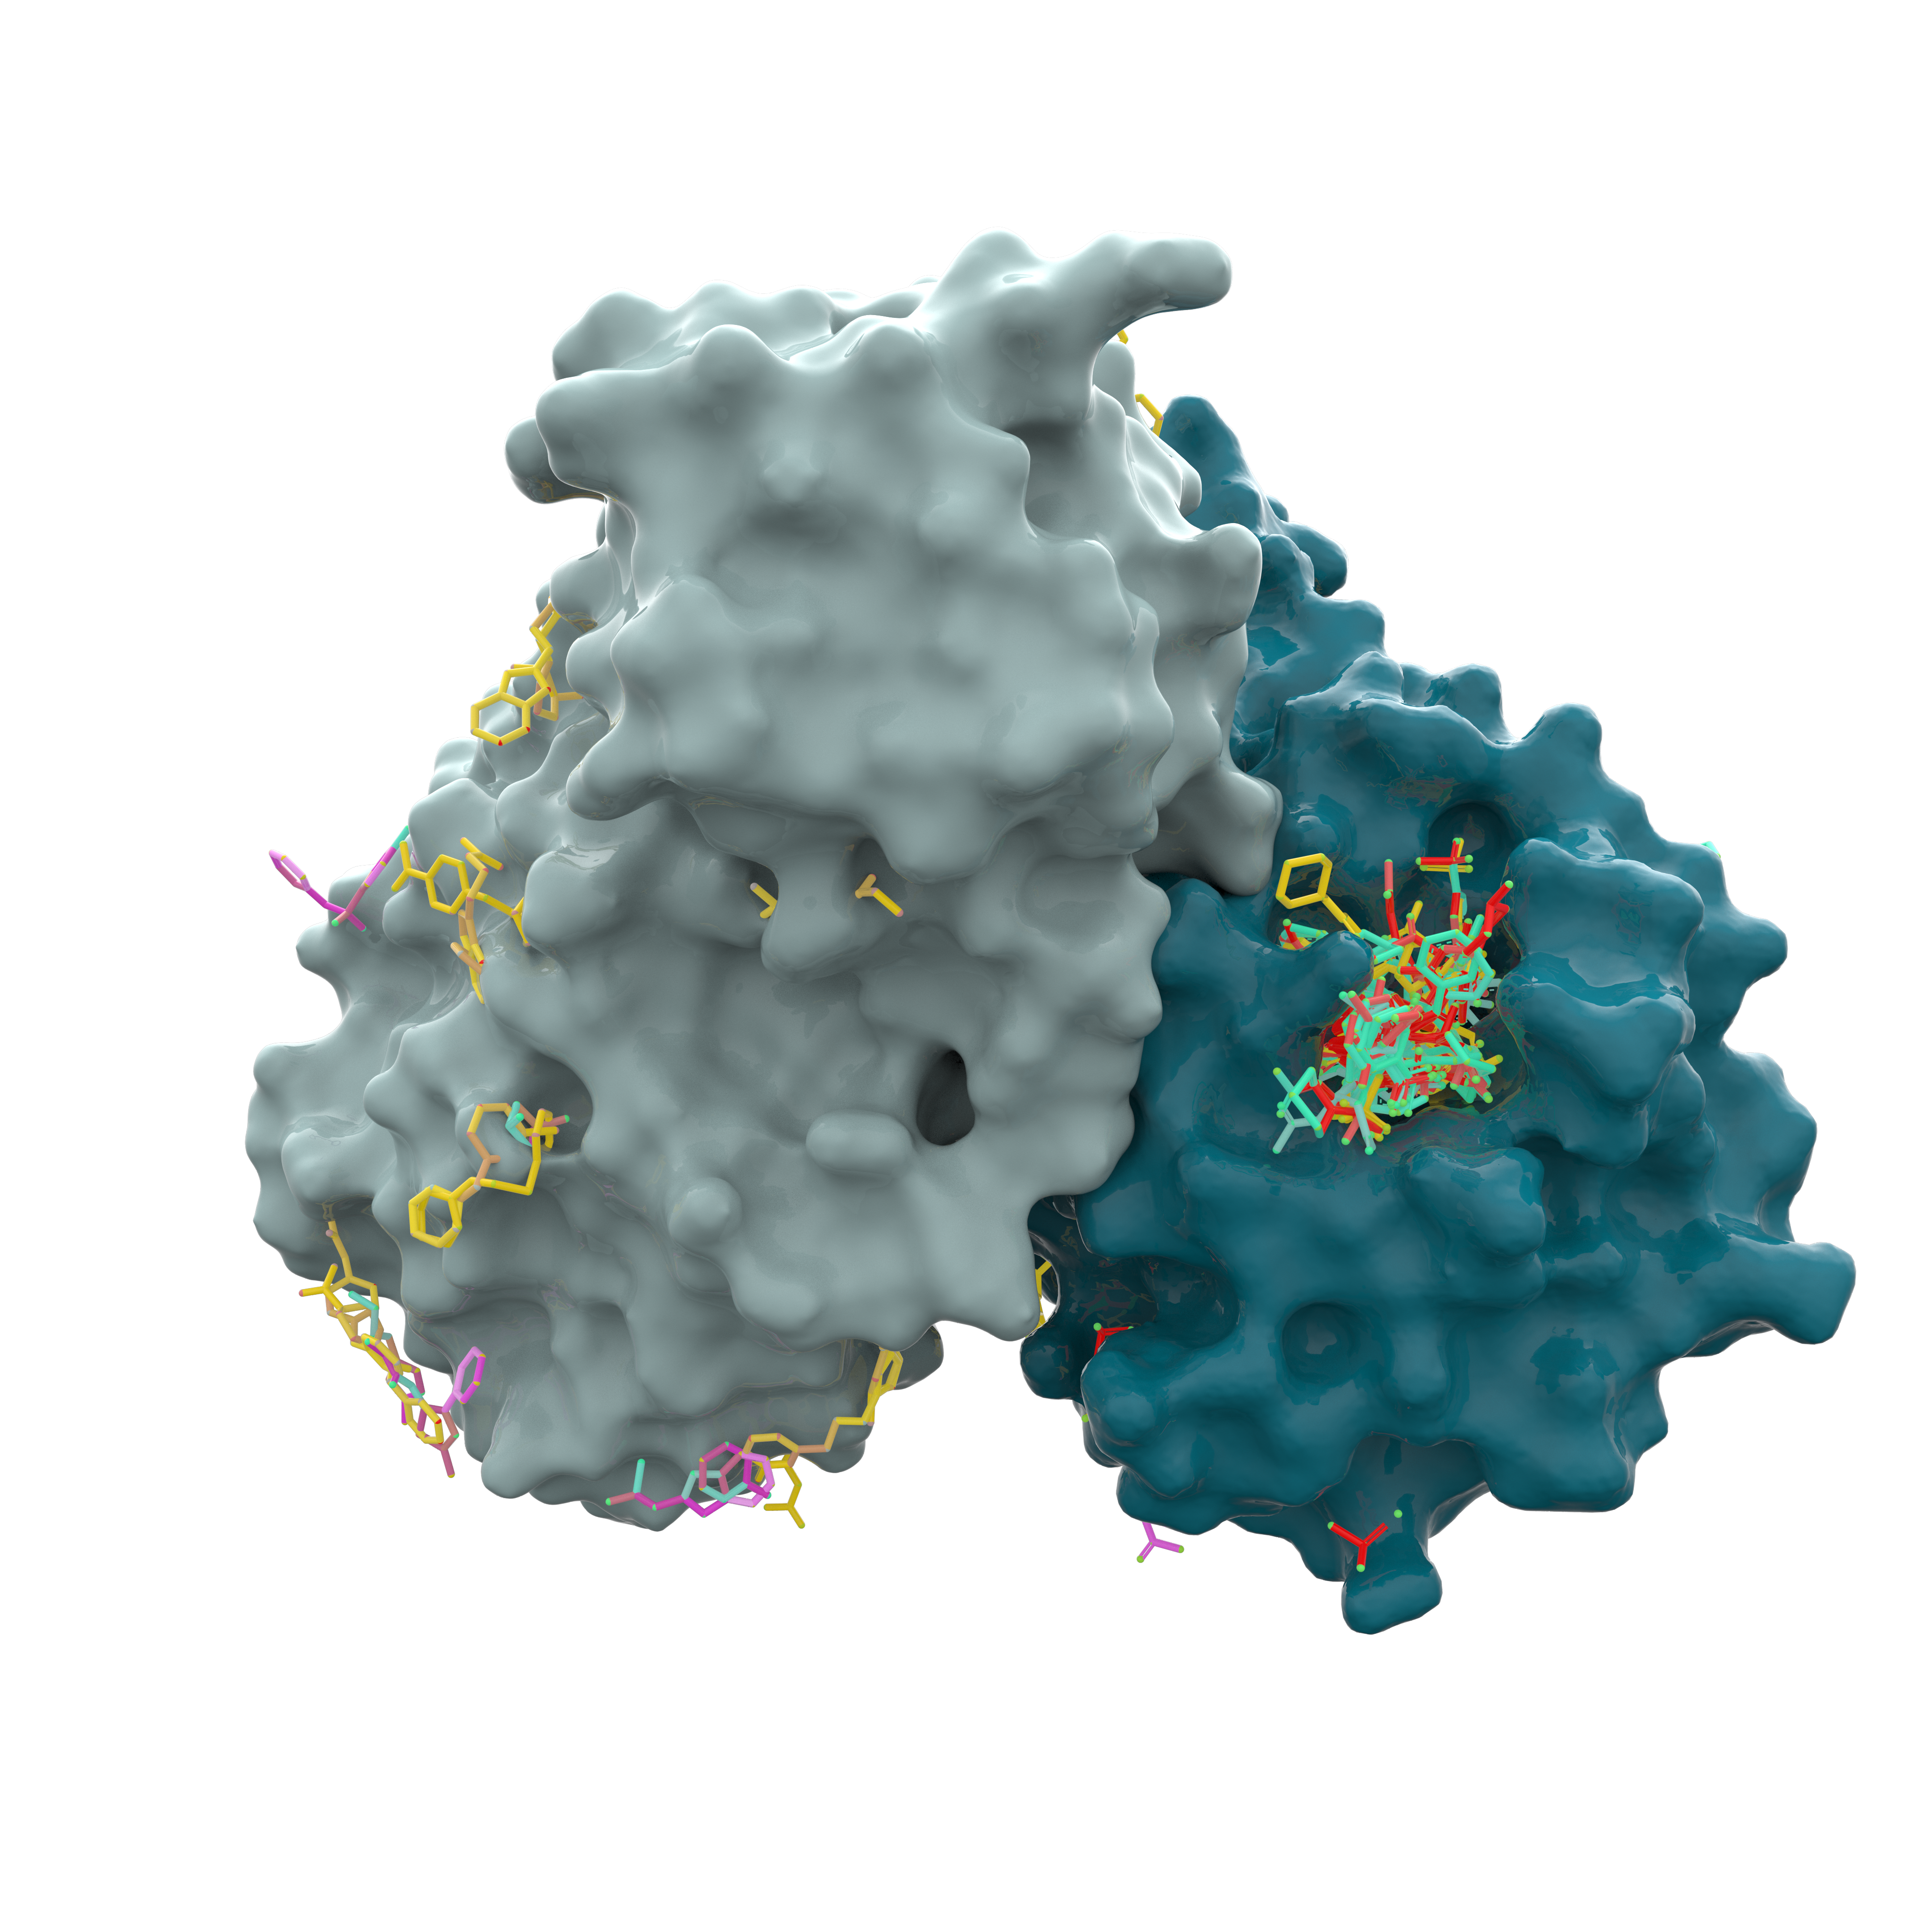 Representation of the chemicals binding to the main protease of the SARS-CoV-2 virus. Copyright: Diamond Light Source, 2020